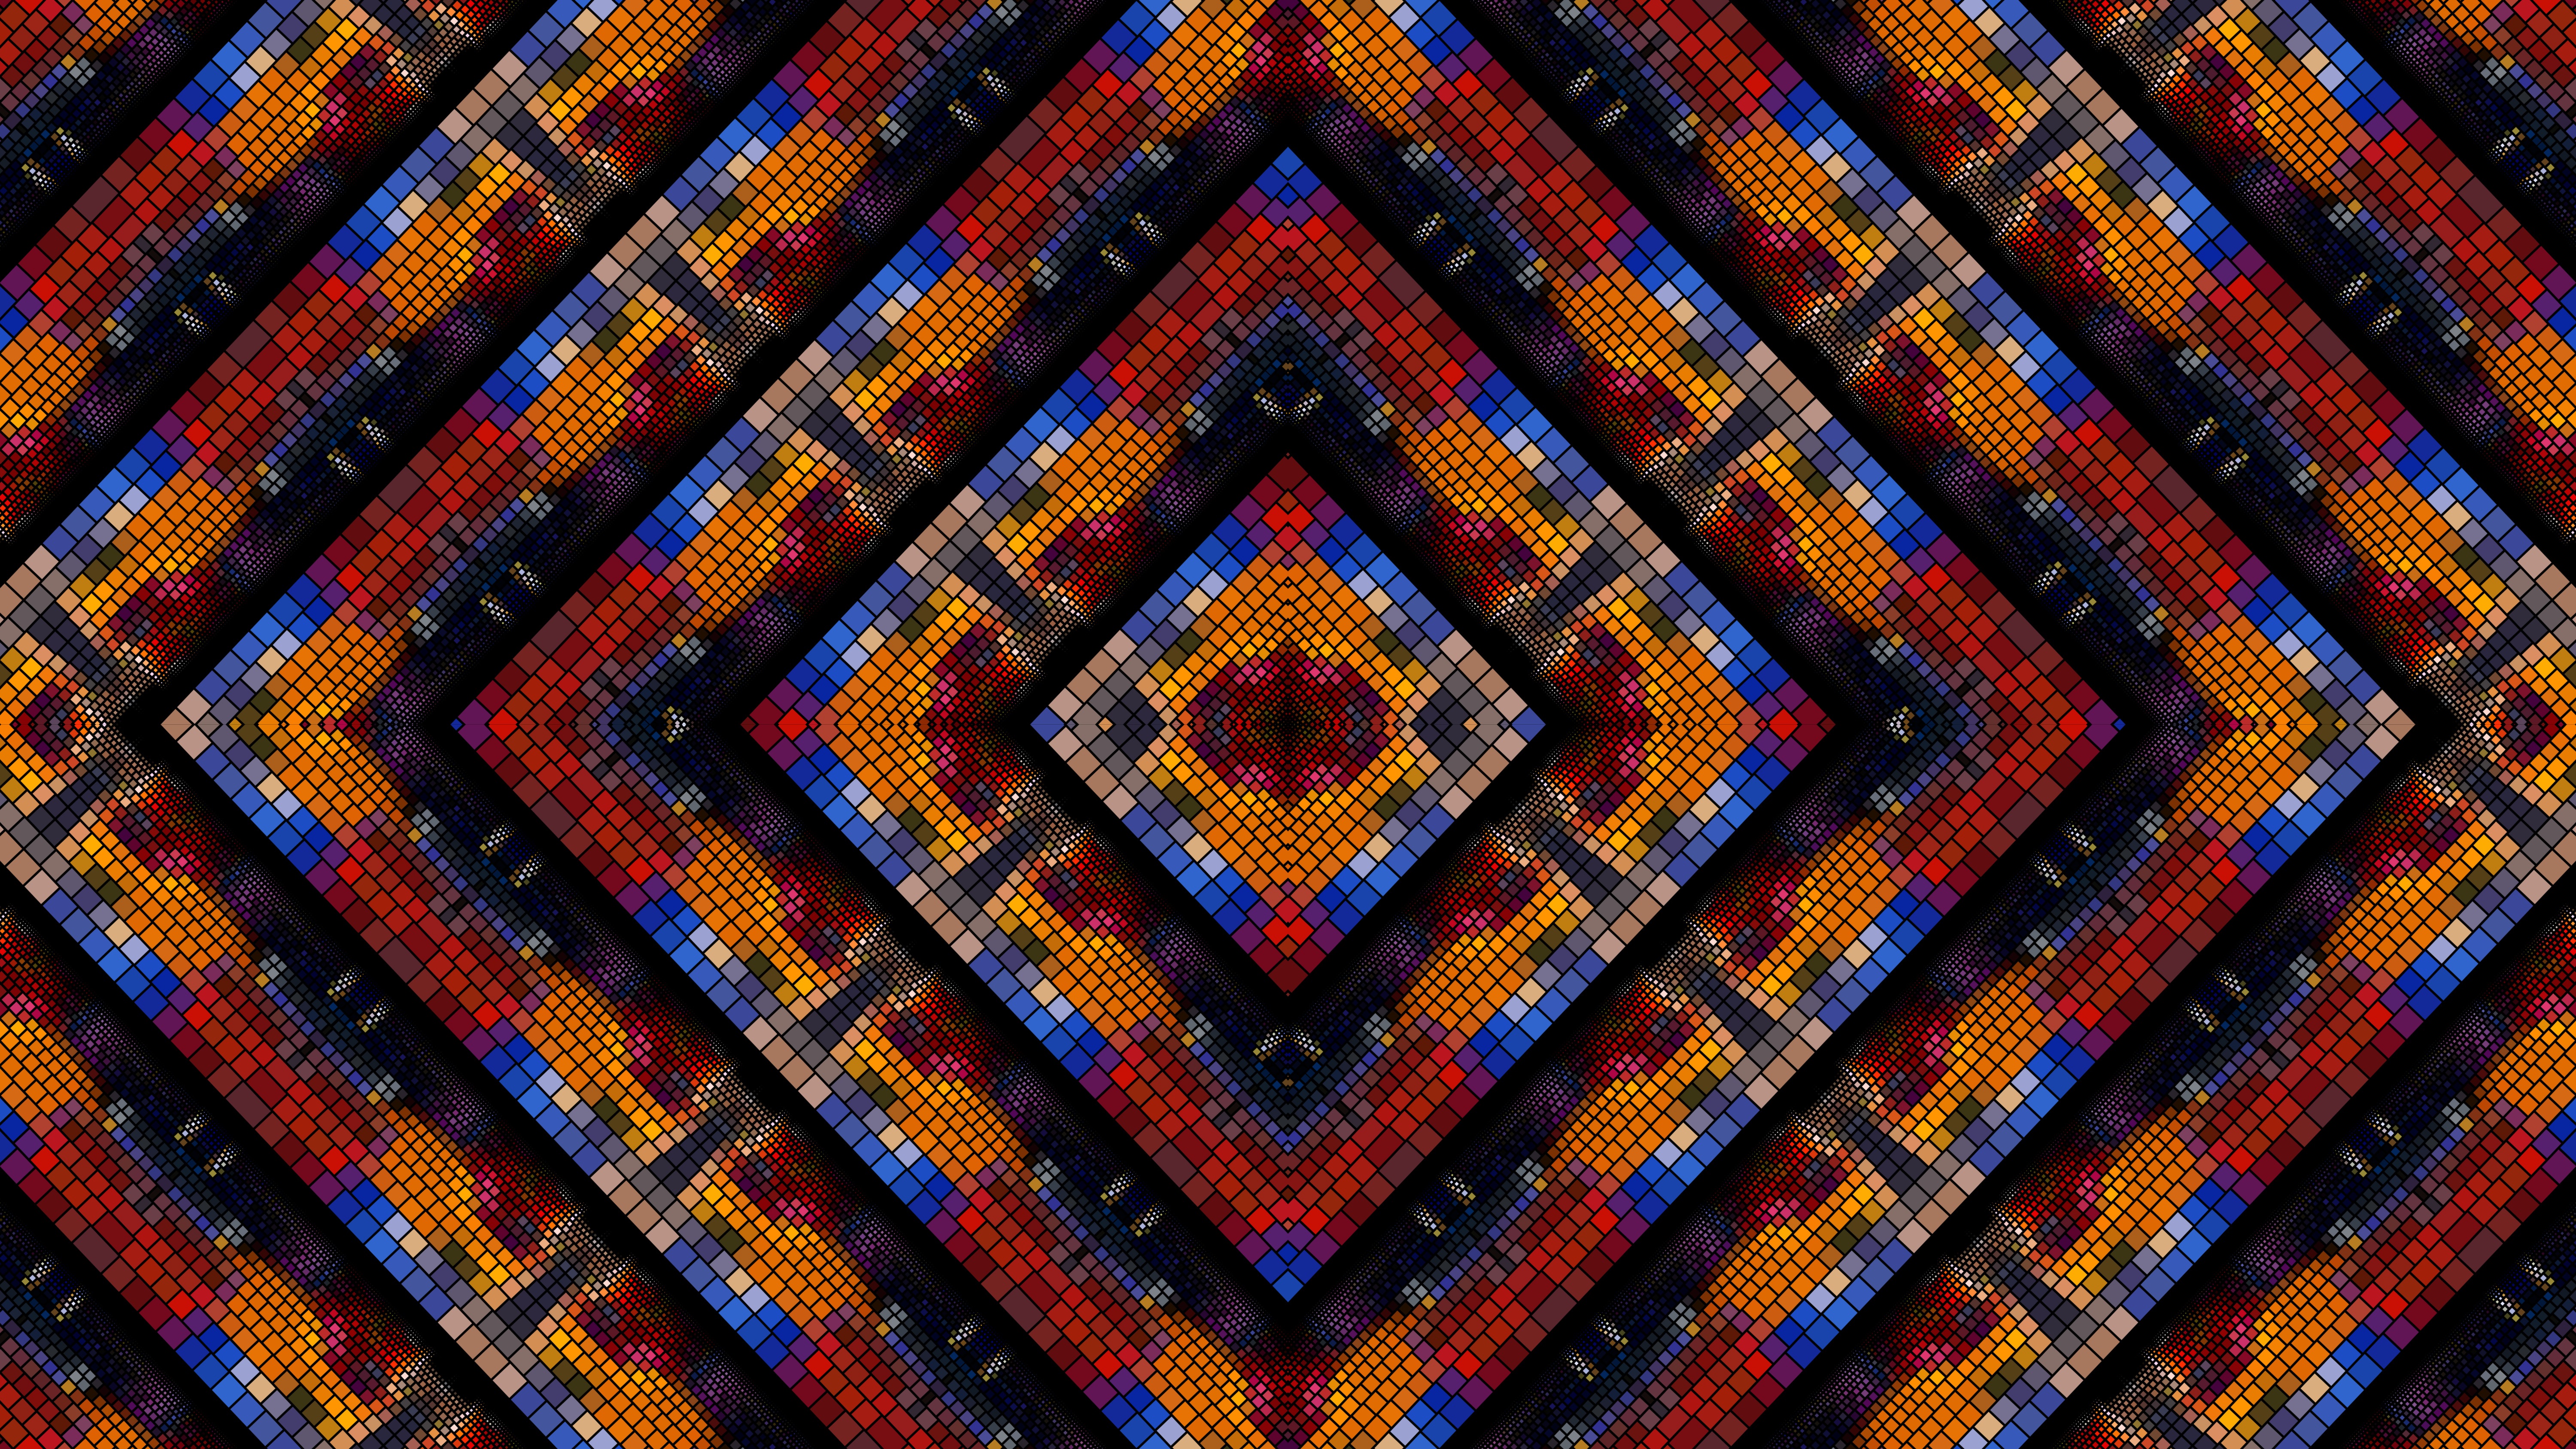 abstract, kaleidoscope, colorful, colors, mosaic, pattern